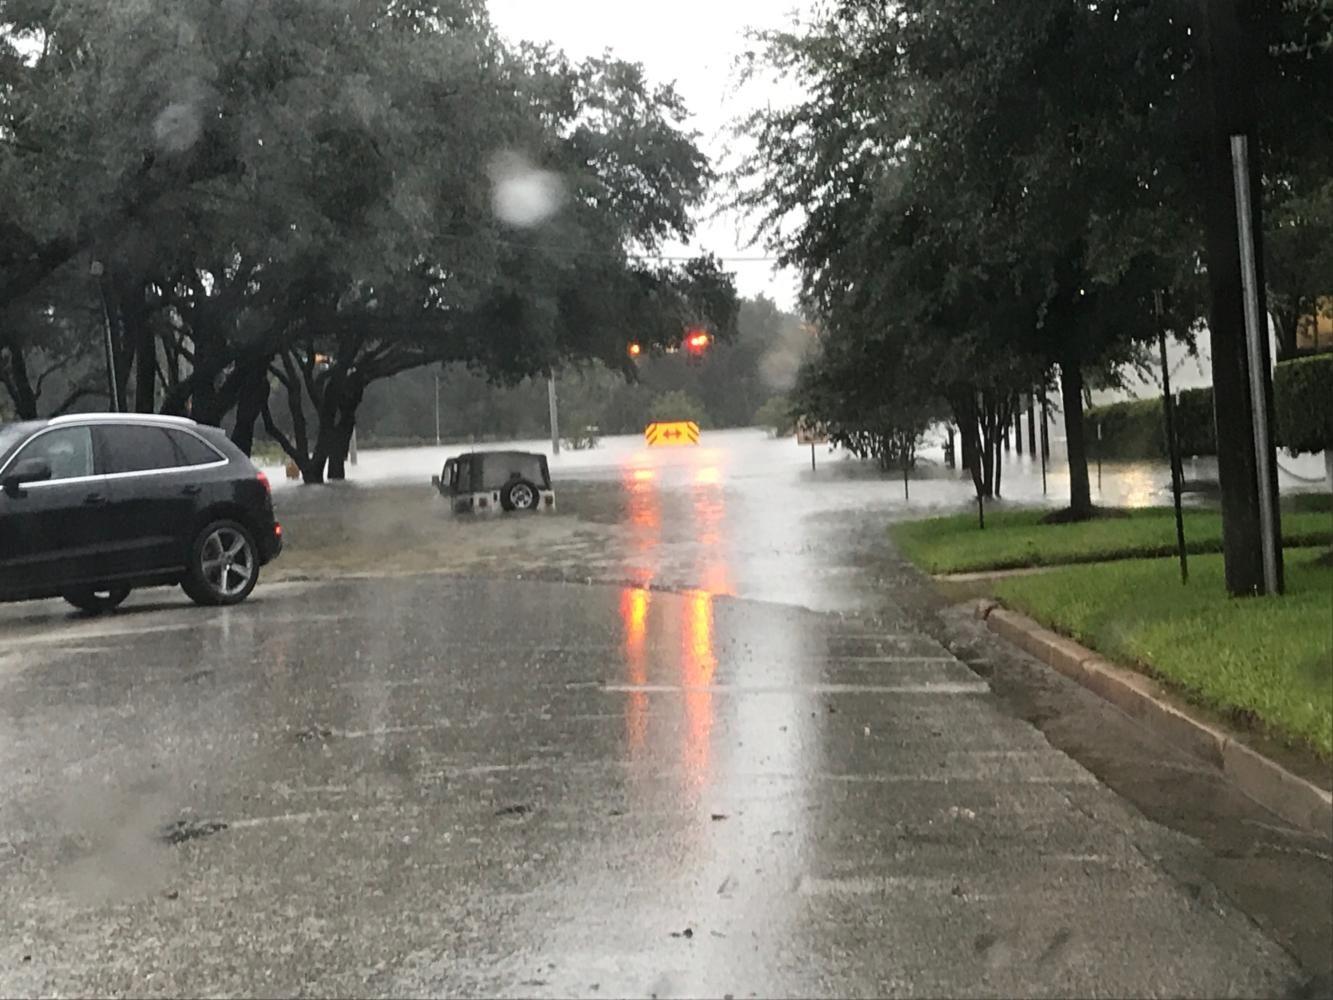 Cars on Allen Parkway at Studemont Street are submerged in water due to flooding caused by Hurricane Harvey. Allen Parkway was hit particularly hard due to it’s proximity to downtown Houston.